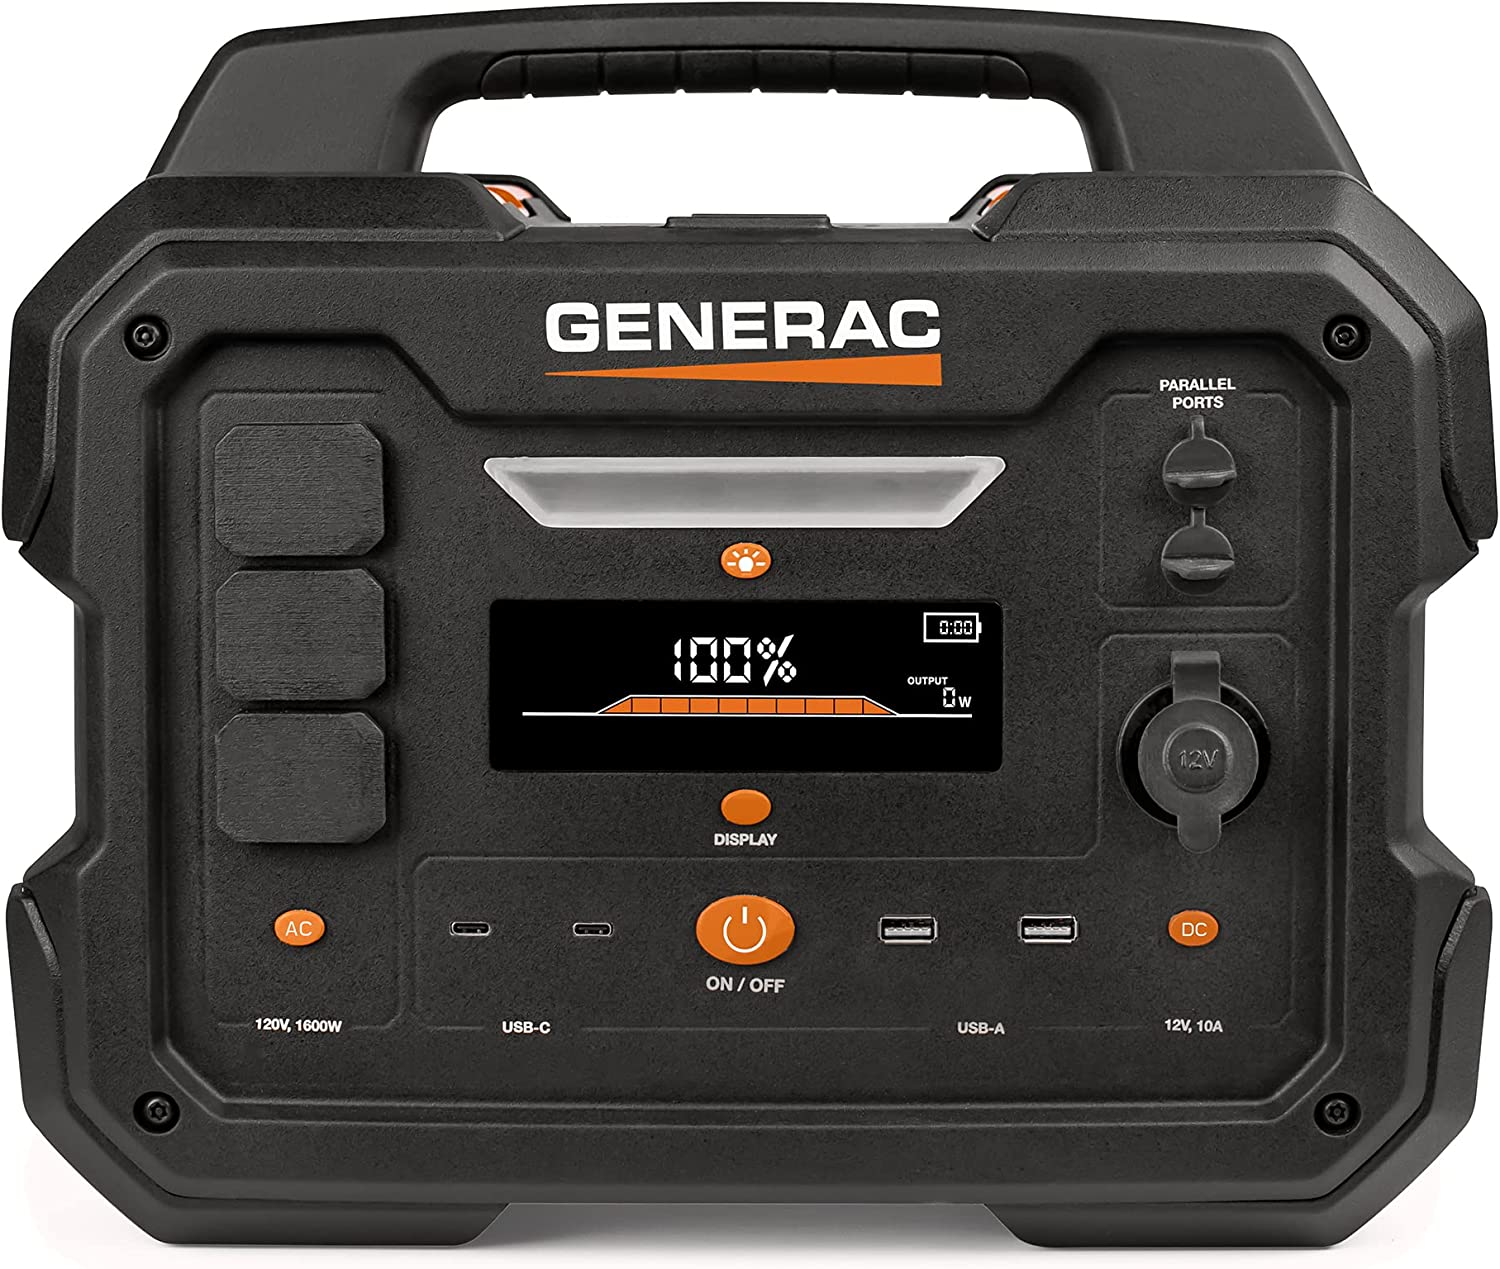 Generac GB1000 1086Wh Portable Battery Power Station Generator with Lithium-Ion NMC, Fast Solar Charging, Wireless Charging Pad for Camping, RV, Indoor/Outdoor Use